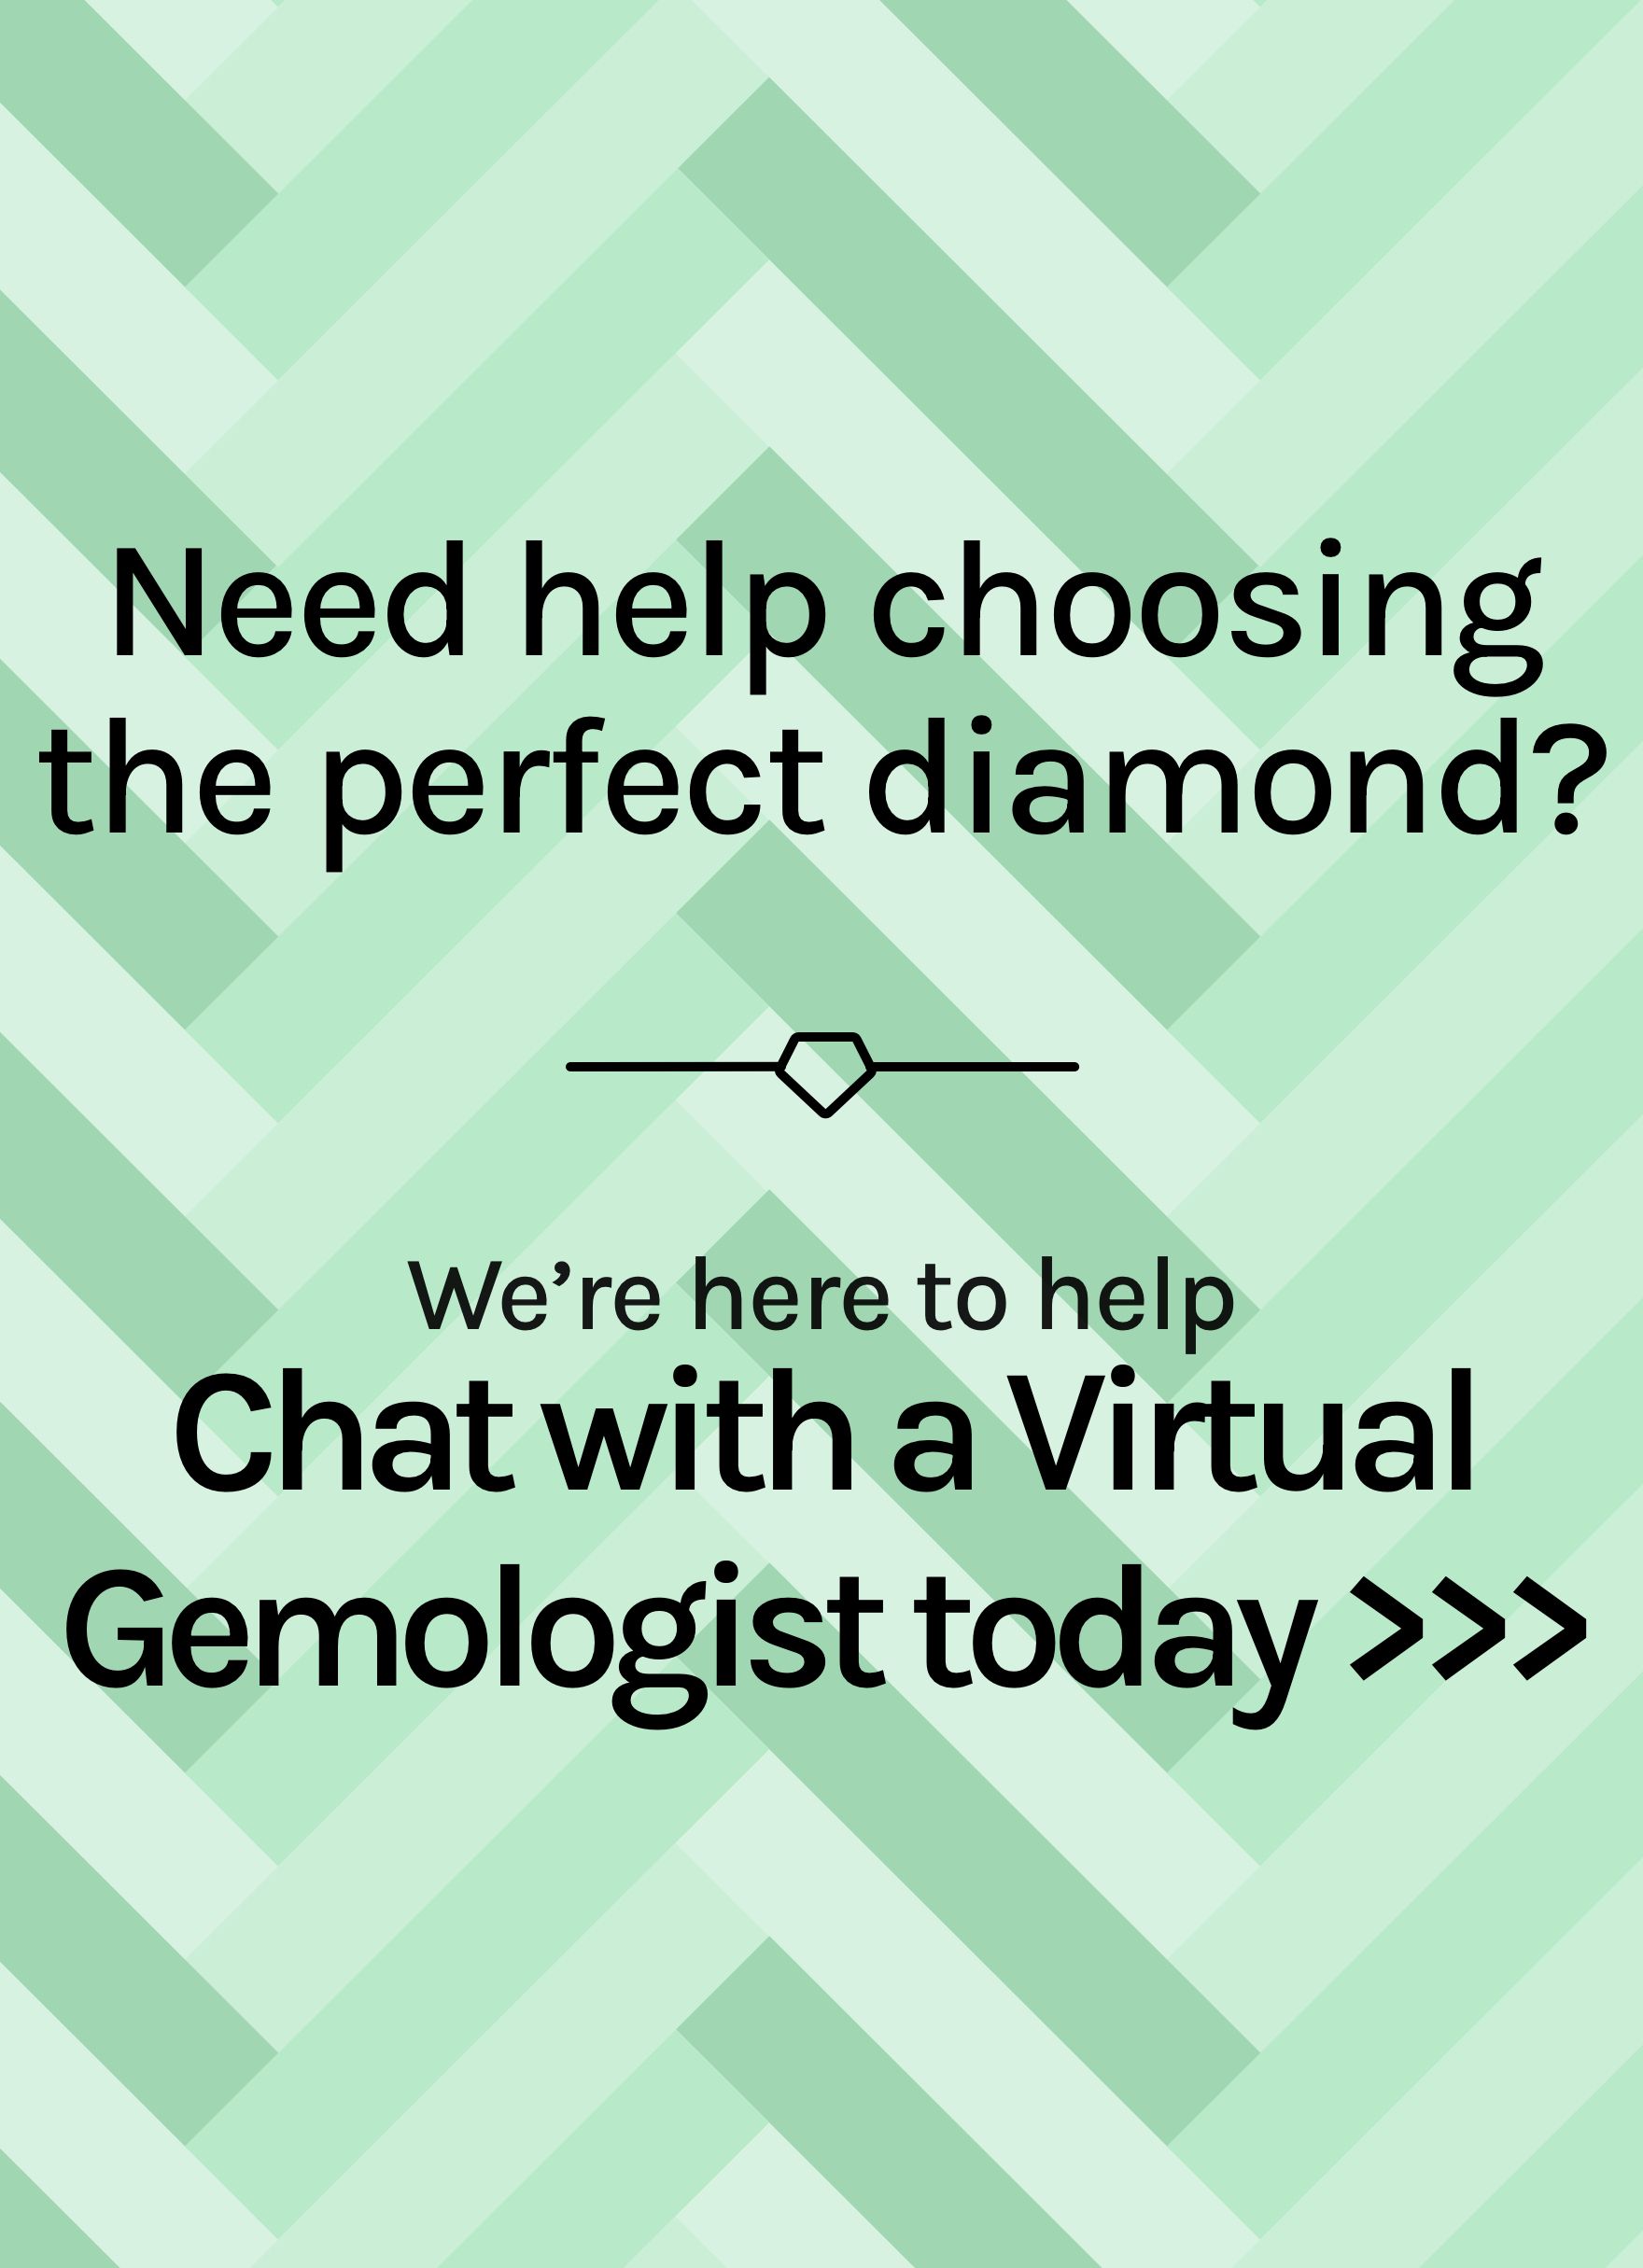 Need help choosing the perfect diamond? We're here to help. Chat with a Virtual Gemologist today.